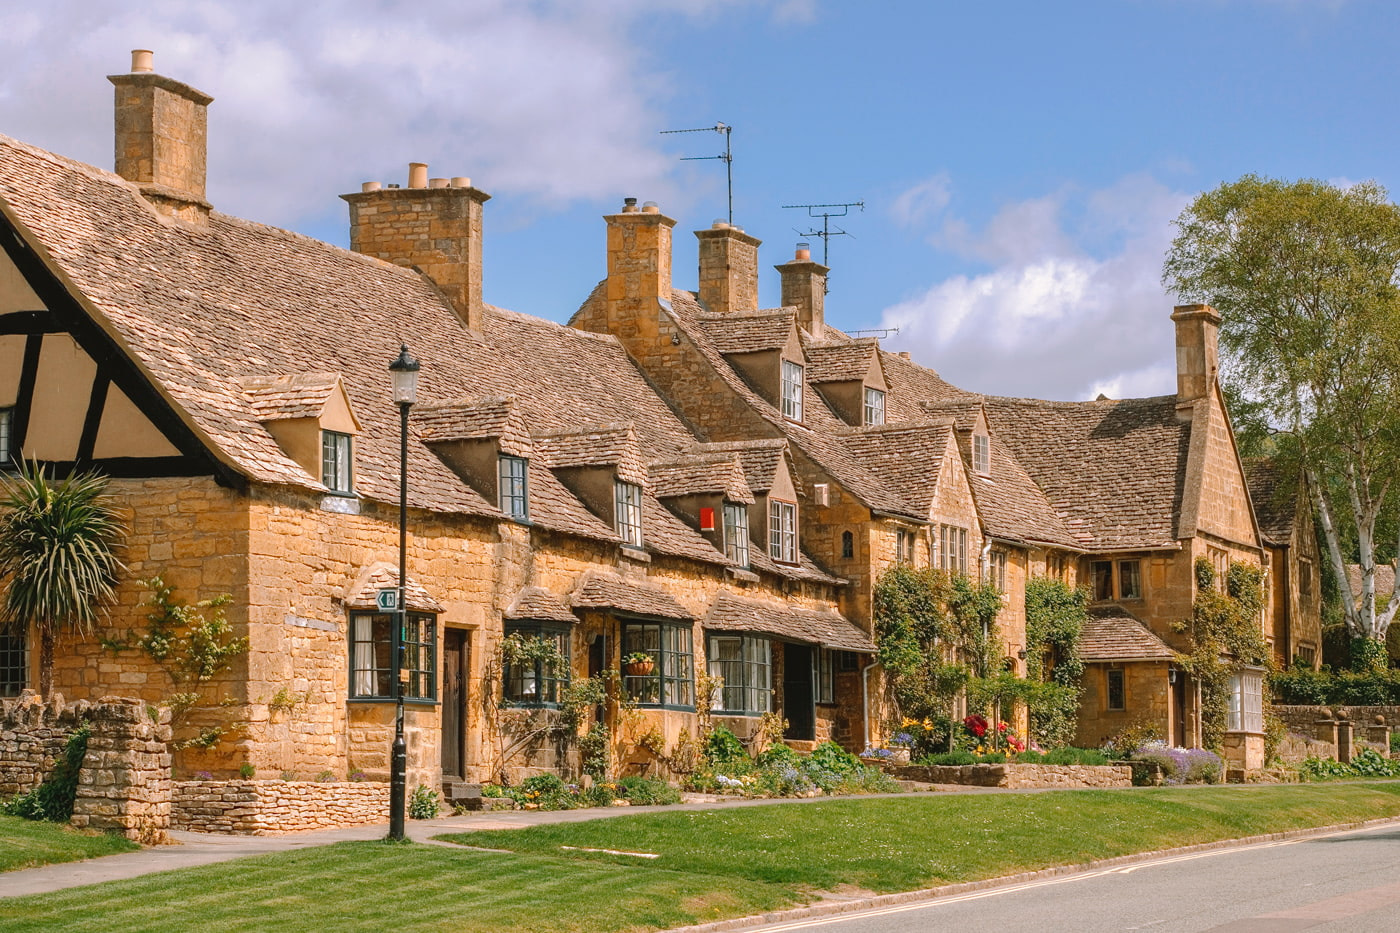 Charming village in the Cotswolds